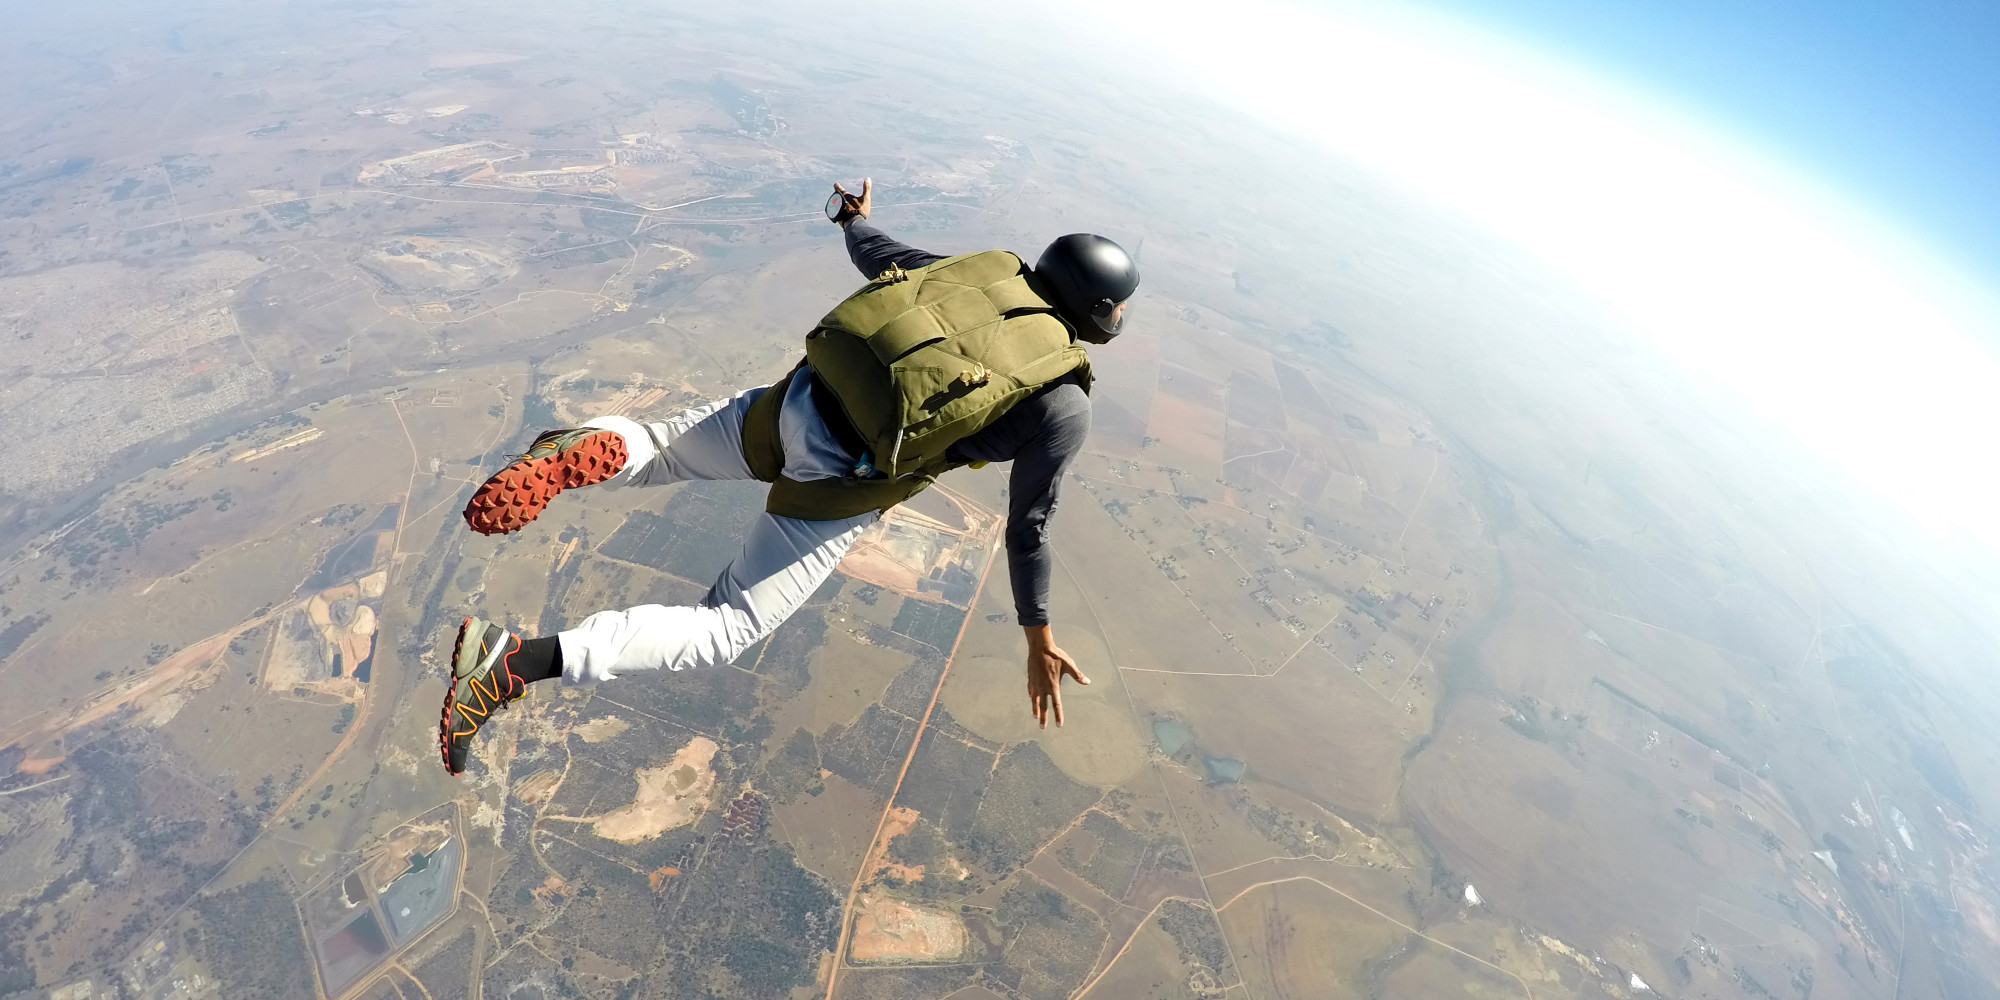 Tandem Skydiving Laptop Wallpapers, HD Tandem Skydiving 1366x768 Backgrounds,  Free Images Download